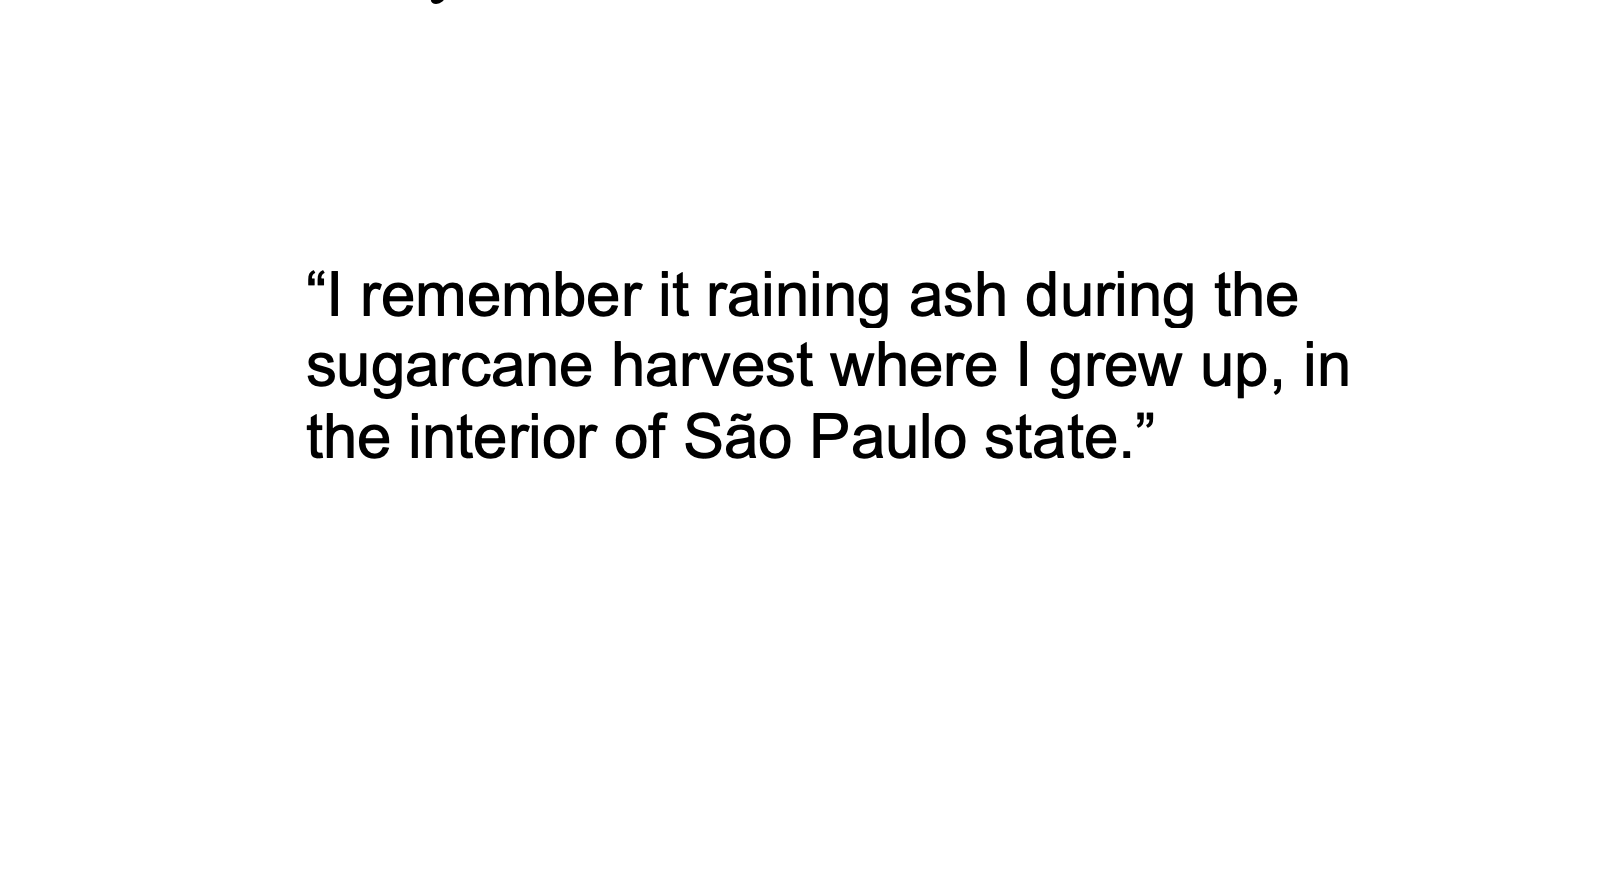 Text stating "I remember it raining ash during the sugarcane harvest where I grew up, in the interior of São Paulo state."